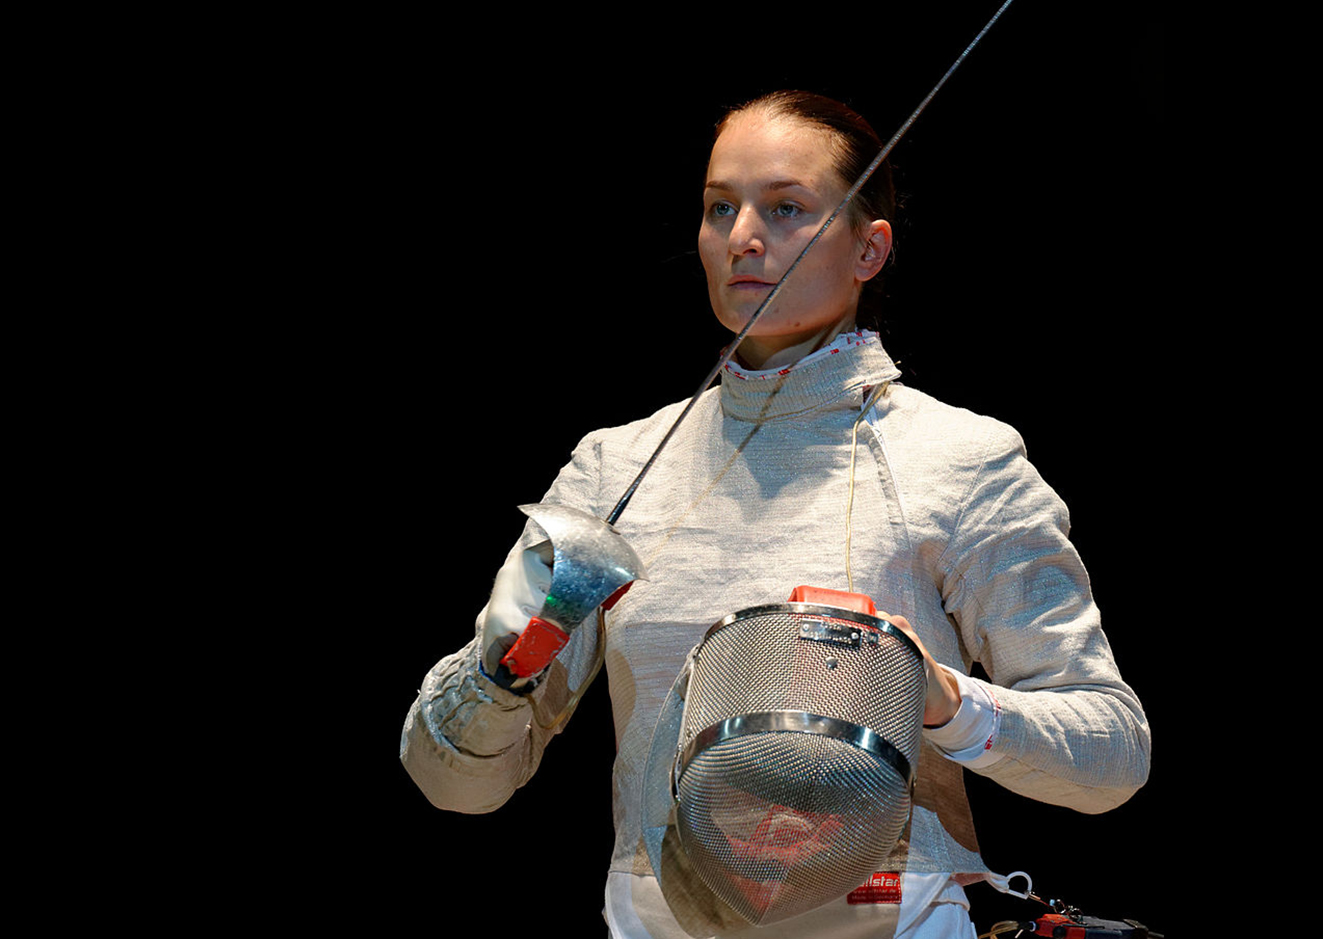 Russian and French female sabre fencers to open the SPIEF 2018 sporting programme